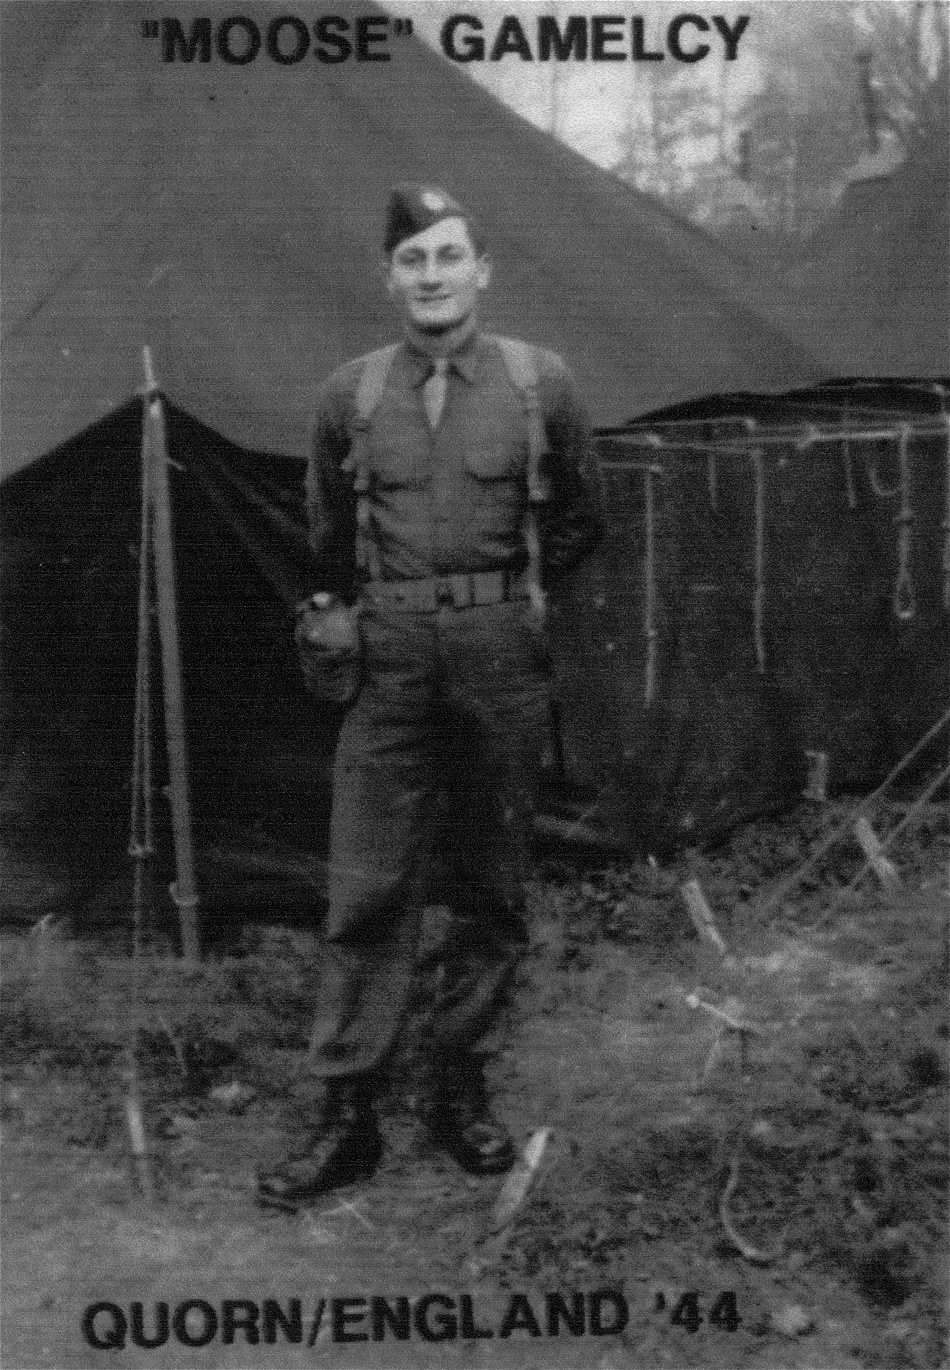 US soldier Private Gilbert L Gamelcy, Camp Quorn 1944